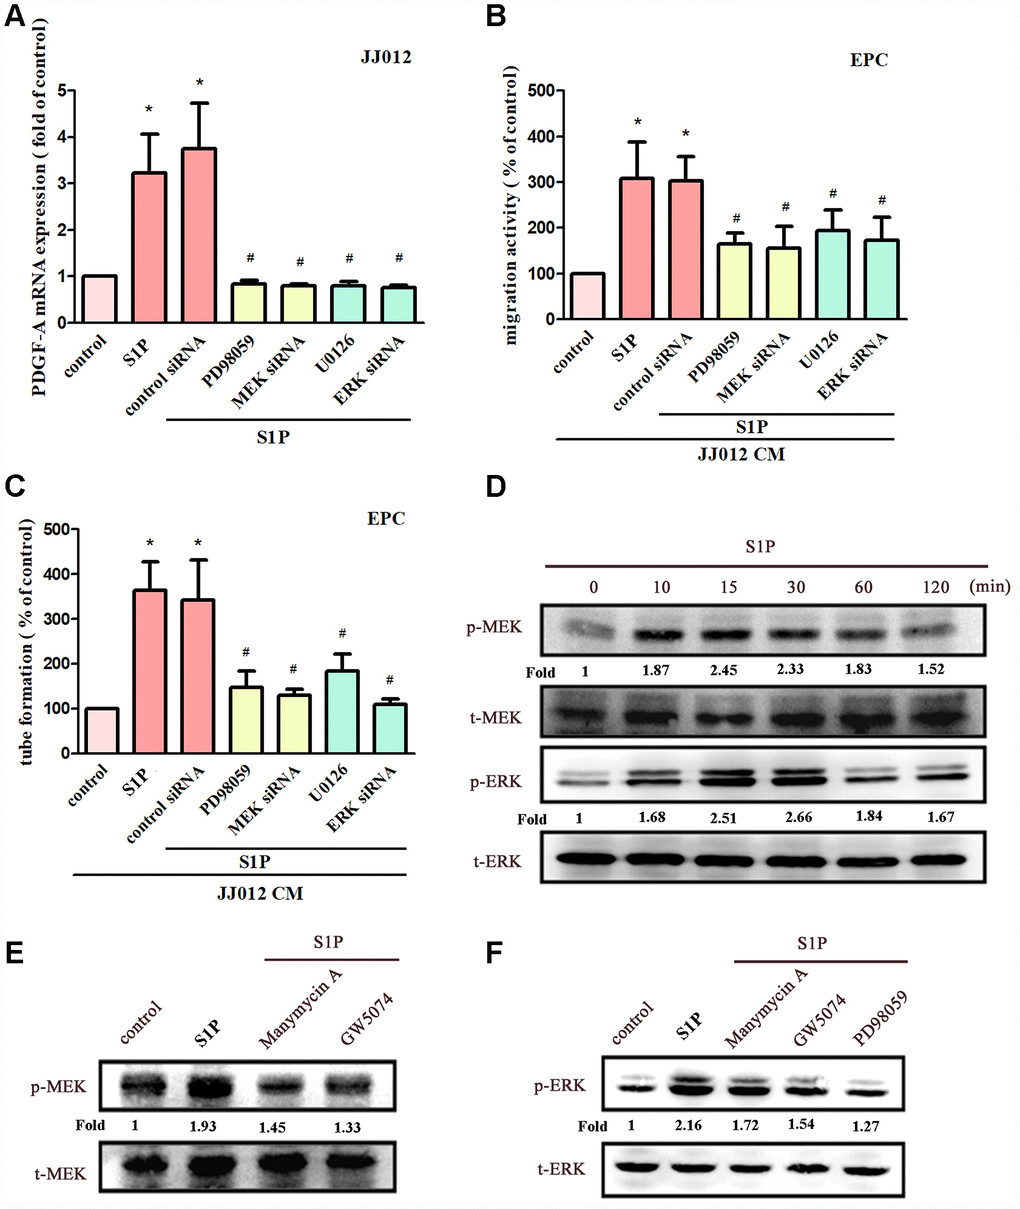 The MEK and ERK pathways mediated S1P-promoted PDGF-A expression and angiogenesis. (A) Cells were pretreated for 30 min with PD98059 (10 μM) and U0126 (5 μM), or transfected with MEK and ERK siRNAs, then stimulated with S1P (10 μM). PDGF-A expression was examined by qPCR assays (n=5). (B, C) The CM was applied to EPCs and analyses assessed migratory and tube formation activity (n=4). (D) JJ012 cells were incubated with S1P; MEK and ERK phosphorylation was examined by Western blot assay (n=3). (E, F) JJ012 cells were pretreated with manumycin A, GW5074 and PD98059 for 30 min, then stimulated with S1P (10 μM). MEK and ERK phosphorylation was examined (n=3). Results are expressed as the mean ± SEM. *p p 